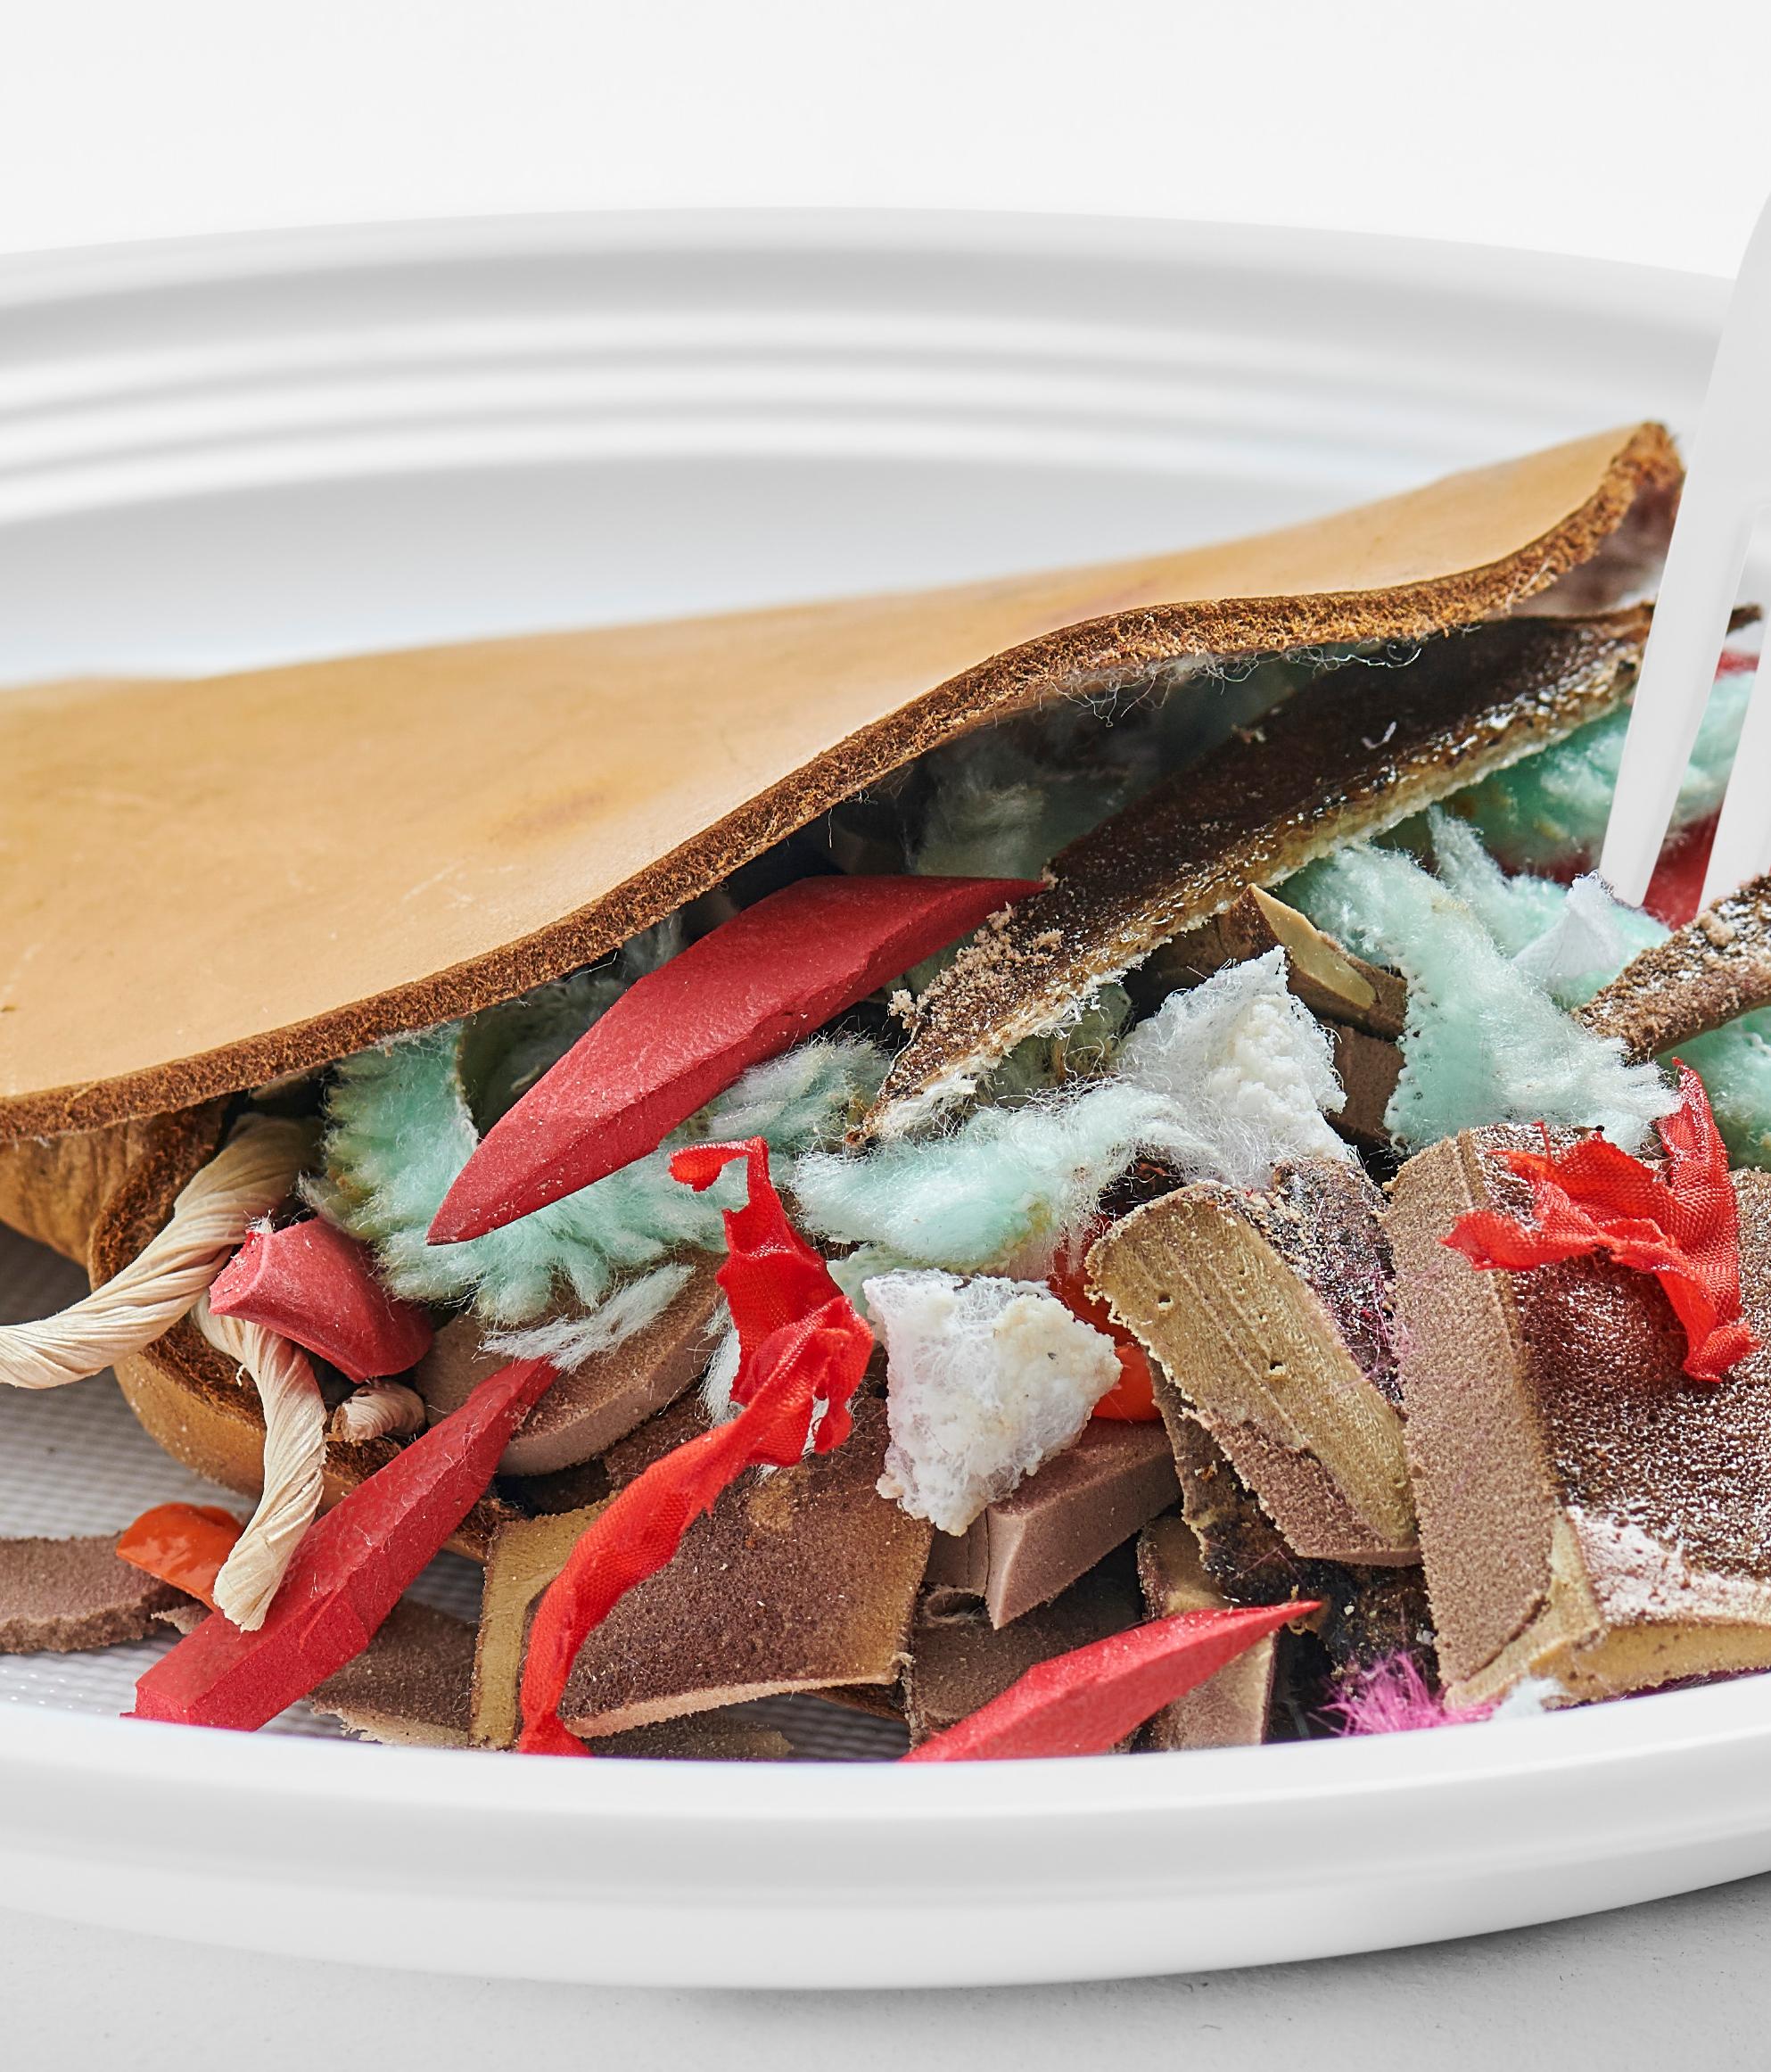 The Kebab is made from rest over waste ingredients found alongside a highway in Rotterdam. Rubdish is a conceptual visualization of waste finding it’sway back onto your plate. It is the transformation of rubbish into an appetizing rub-dish. The